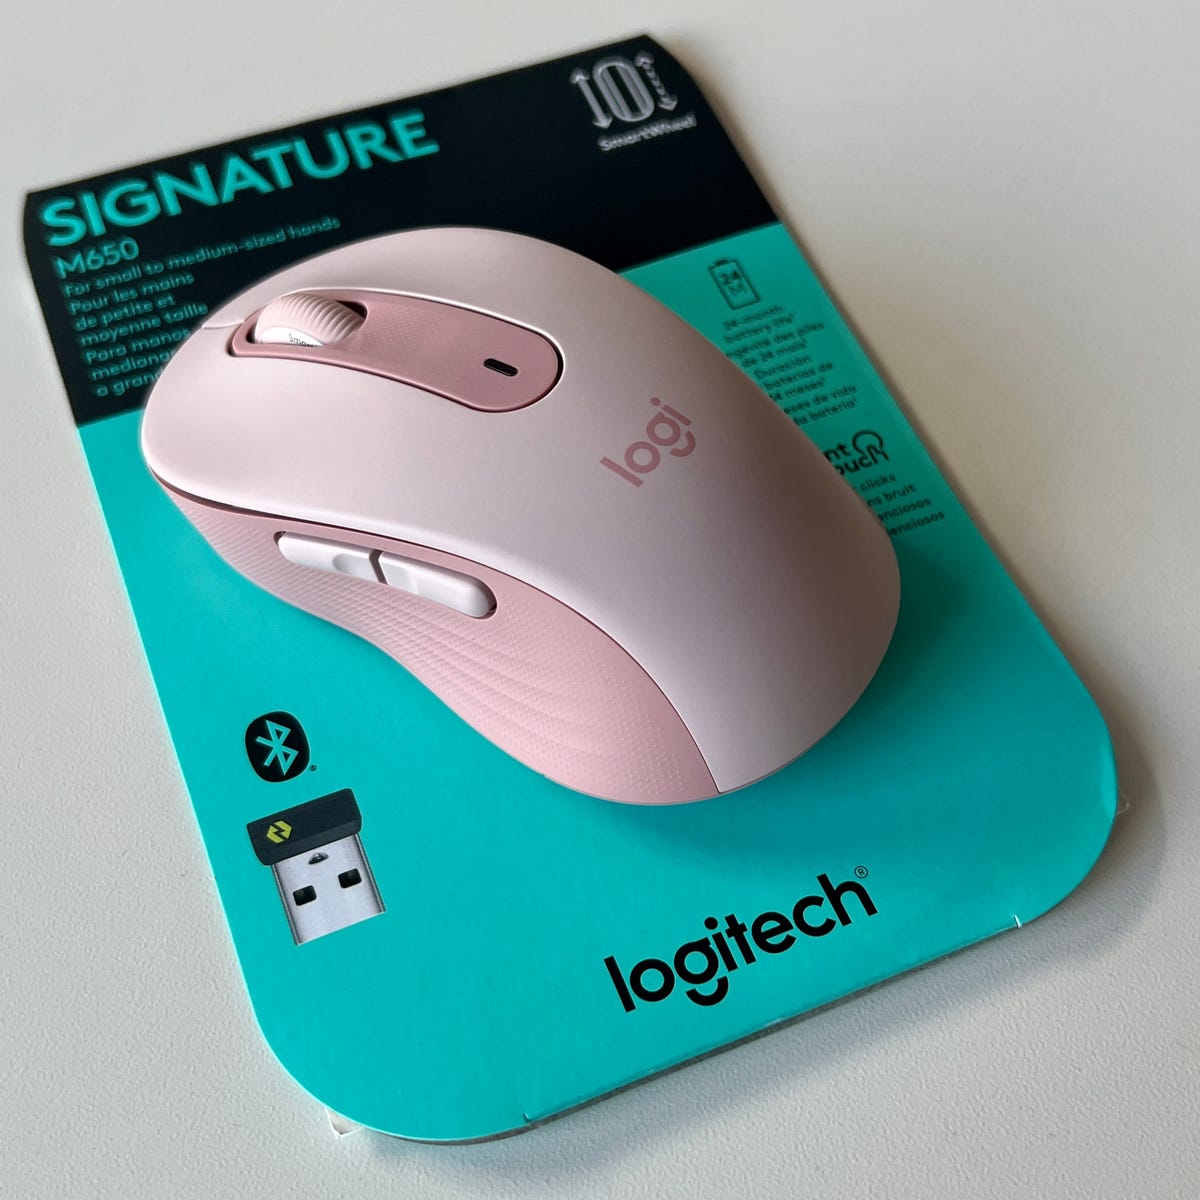 Logitech's new Signature M650 mouse delivers more for less - CNET